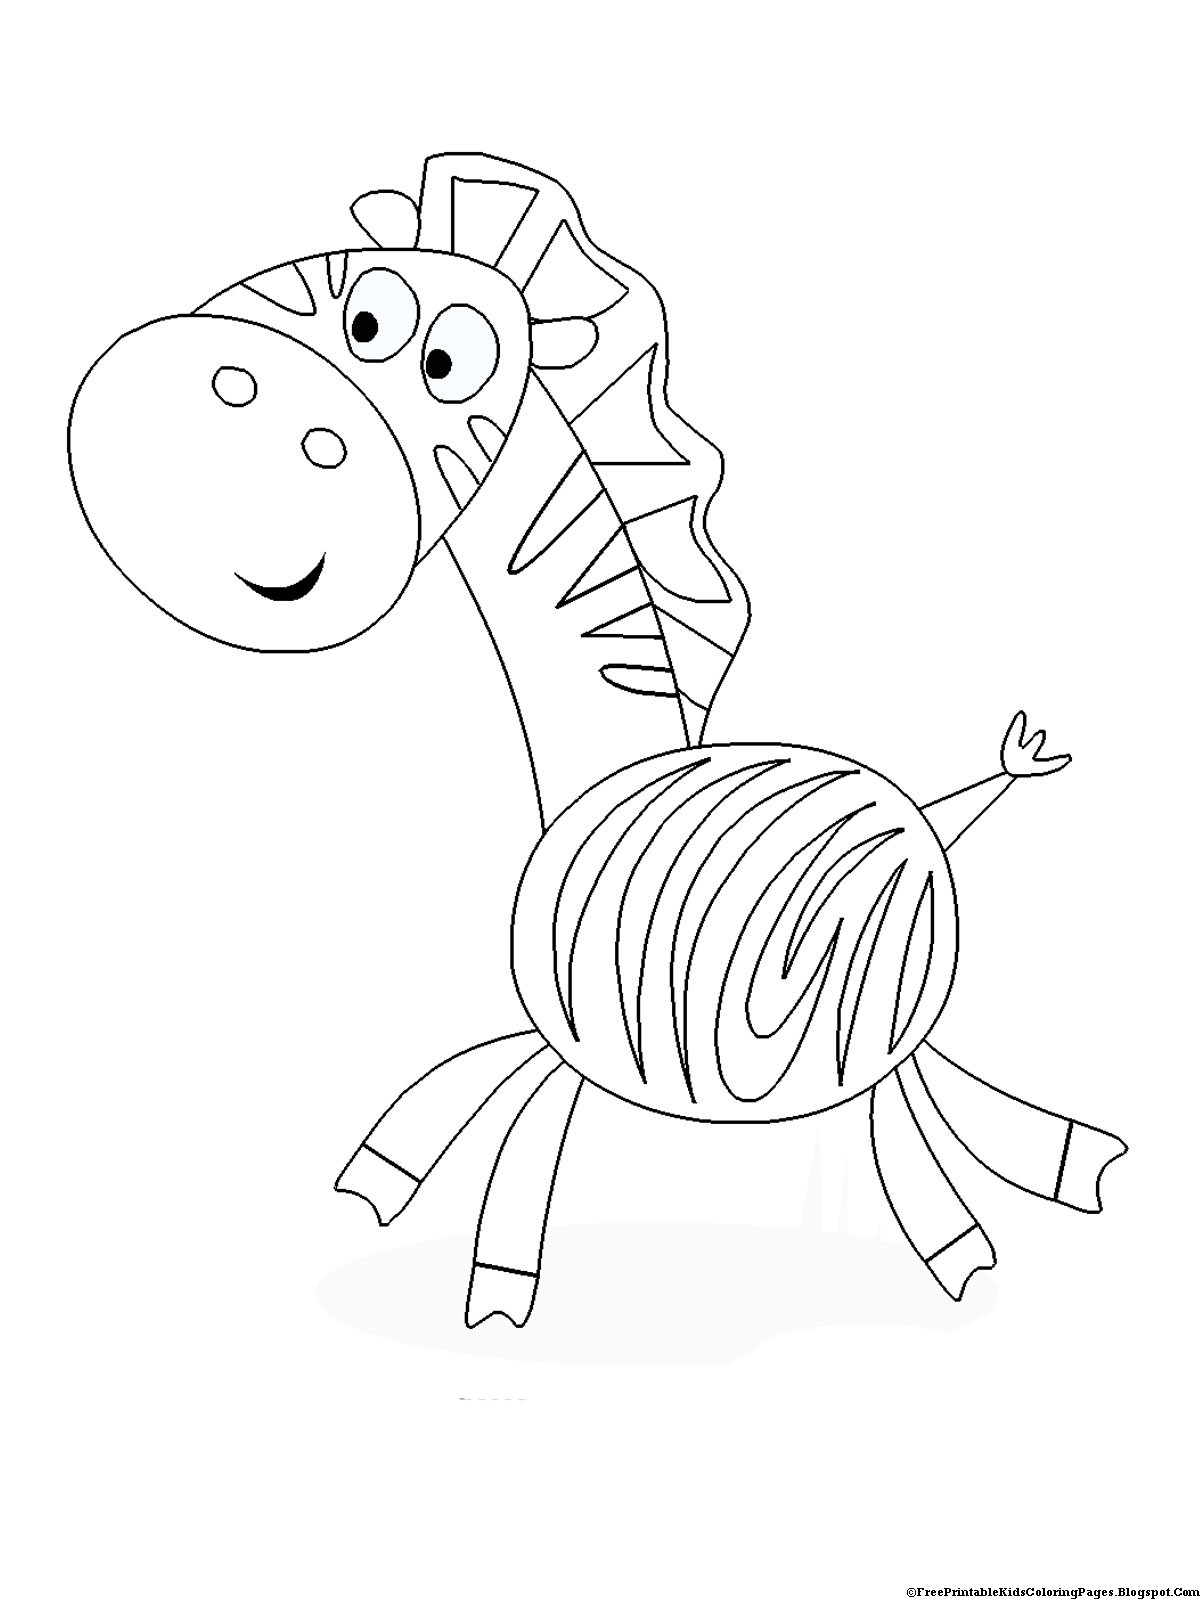 Coloring Book Pages To Print
 Zebra Coloring Pages Free Printable Kids Coloring Pages